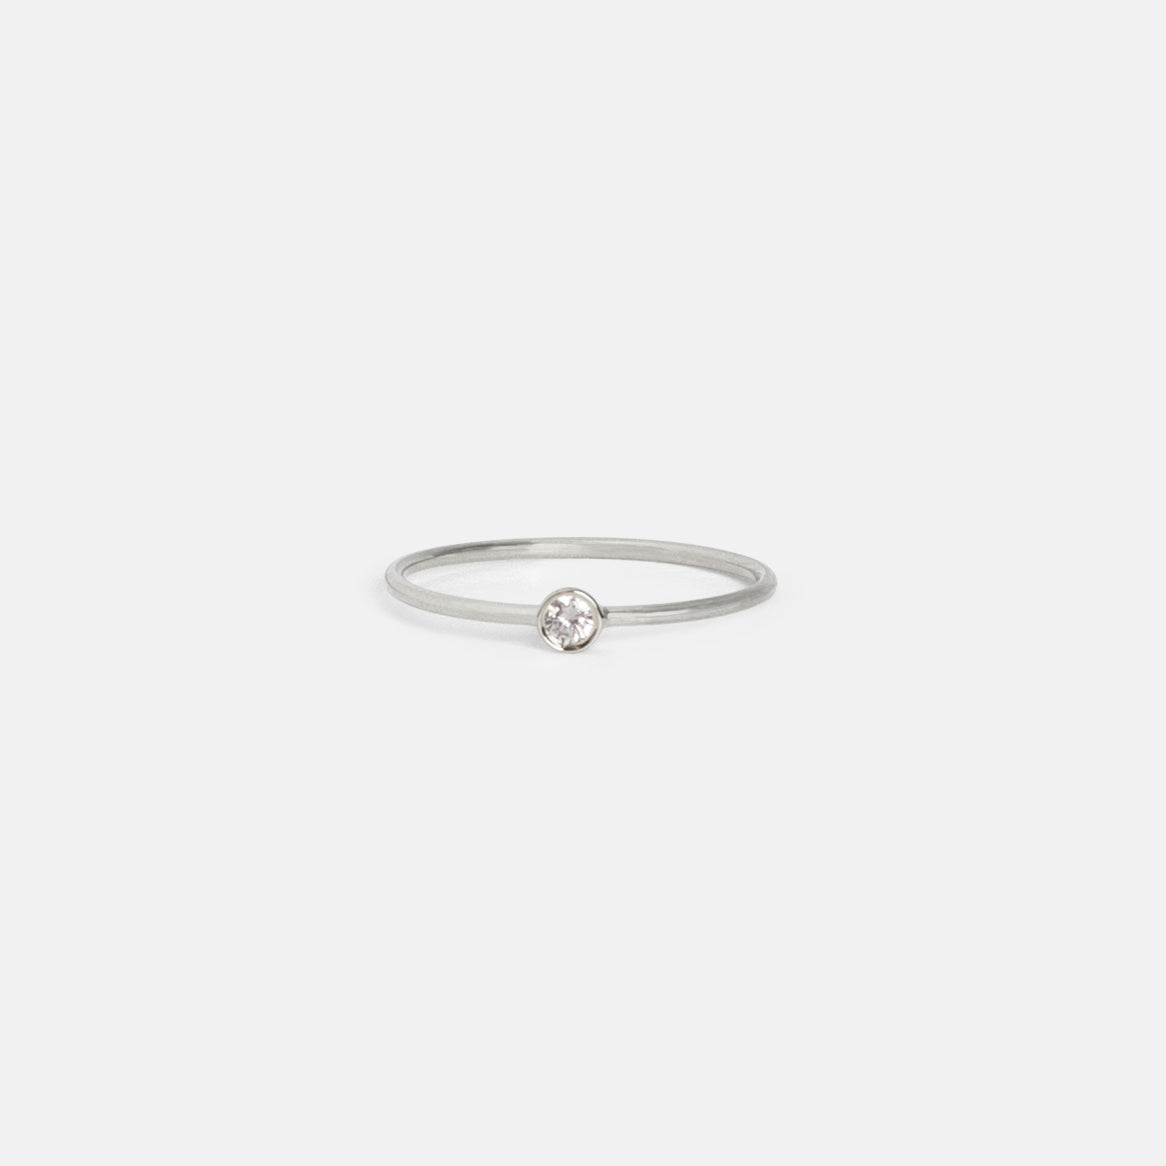 Large Kaya Ring in 14k White Gold set with White Diamond by SHW Fine Jewelry